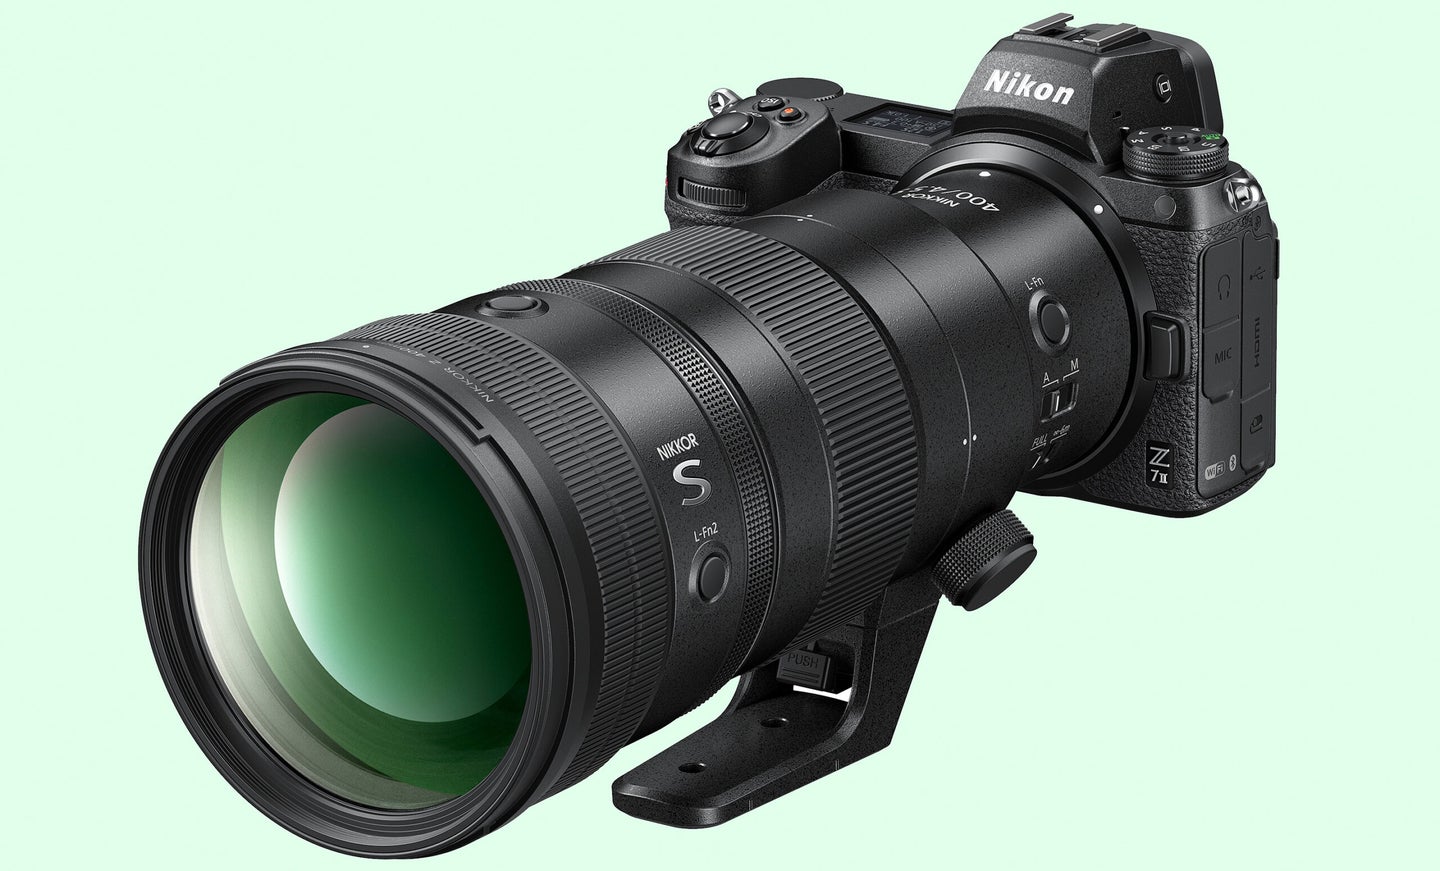 The Nikon Z 400mm f/4.5 VR S is a compact super-telephoto built for handheld shooting